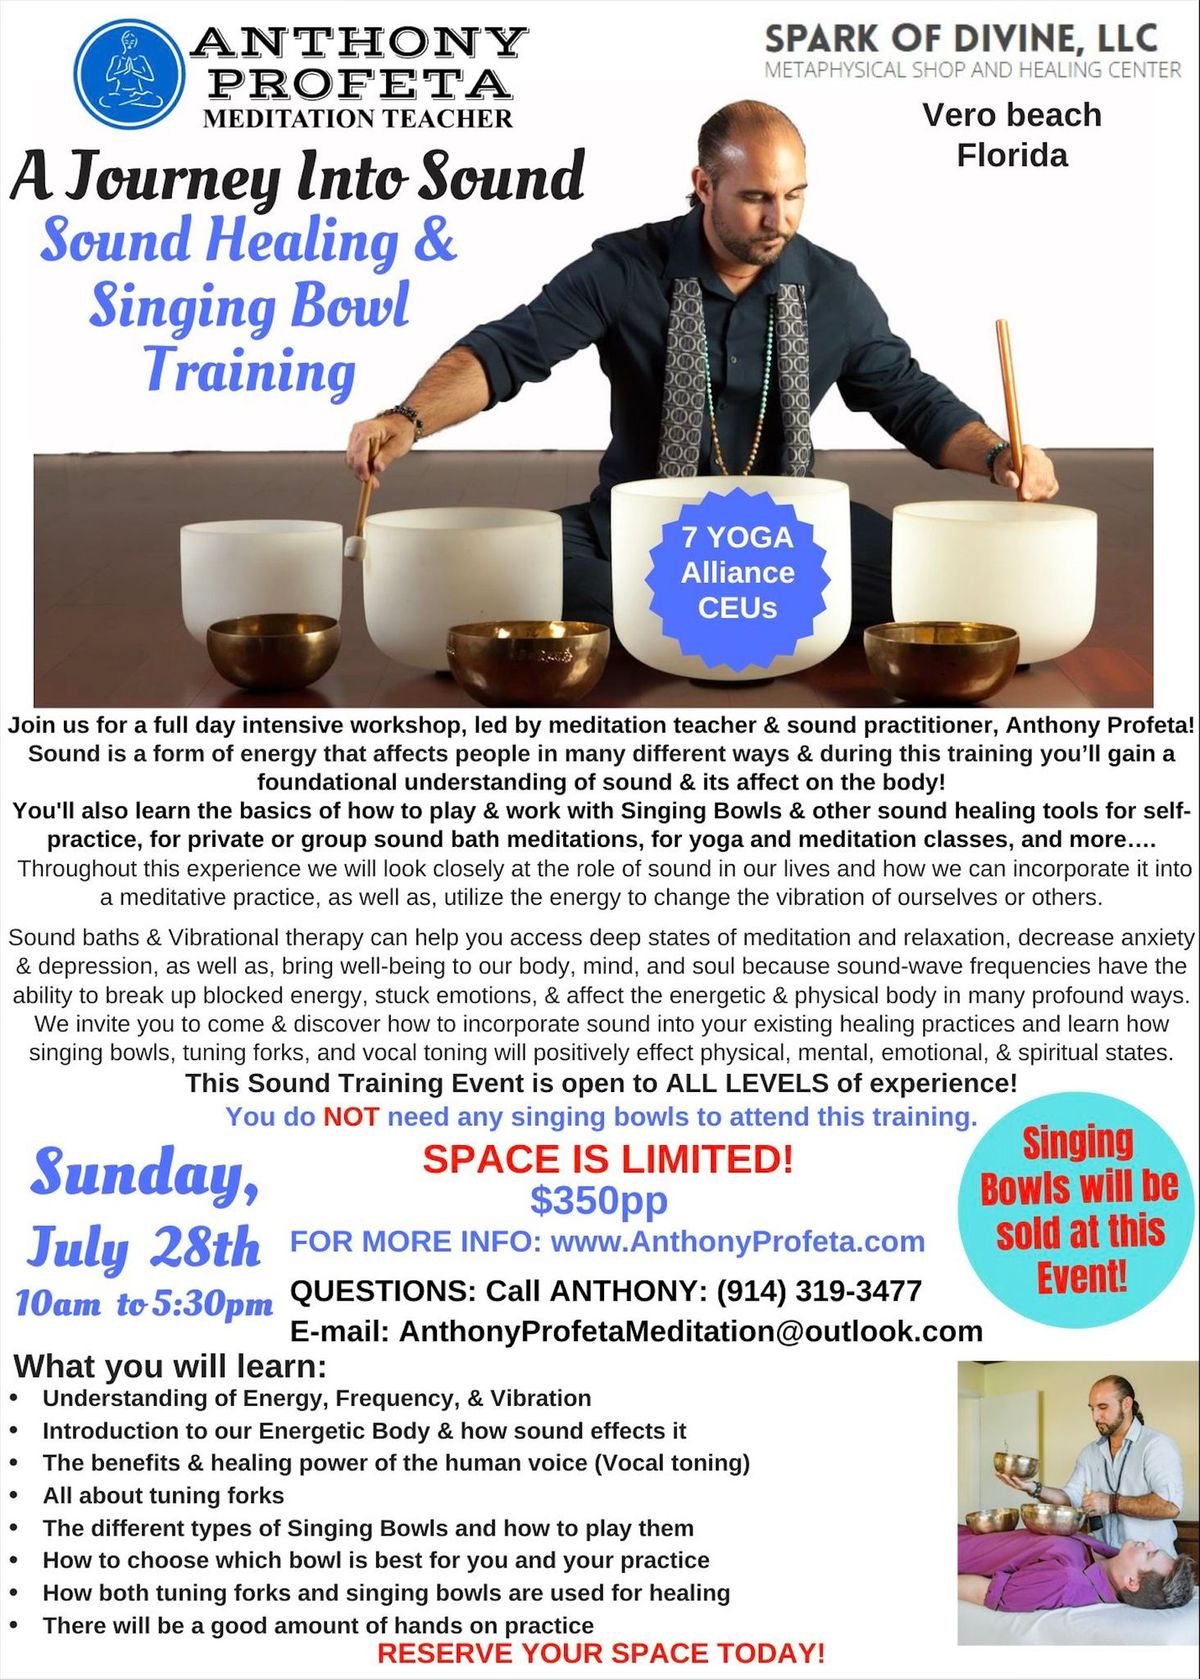 A Journey Into Sound with Anthony Profeta Sound Healing & Singing Bowl Training